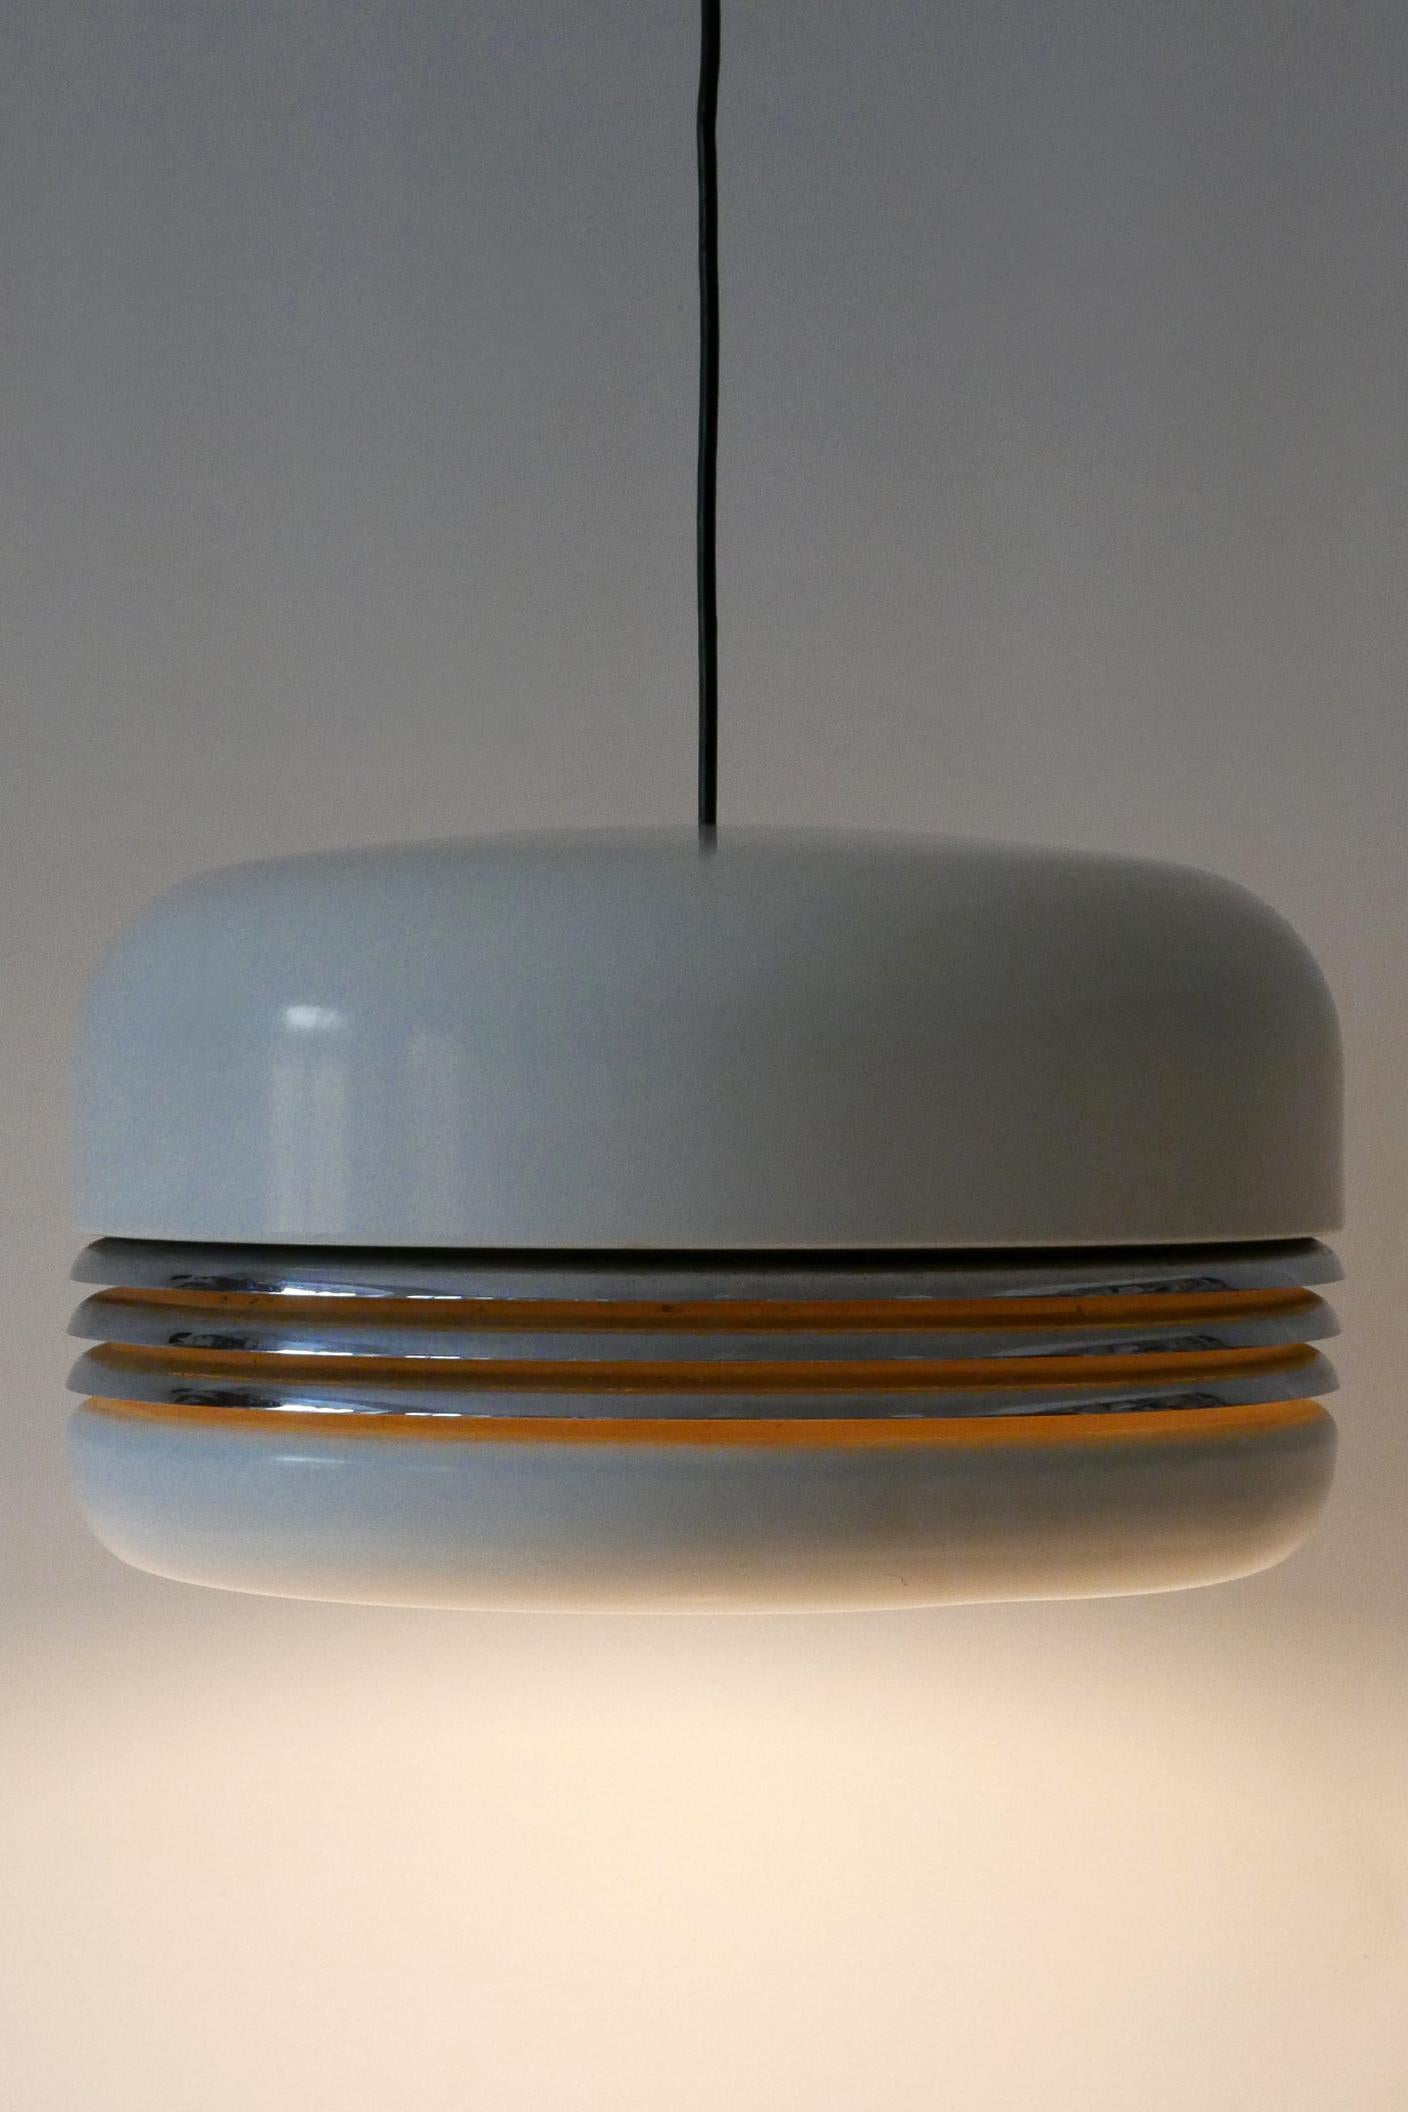 Rare, large and elegant Mid-Century Modern pendant lamp or hanging light '5526'. Designed by Alfred Kalthoff for Staff & Schwarz, Germany, 1970.

Executed in white enameled aluminum and chrome-plated metal, it comes with 1 x E27 / E26 Edison screw